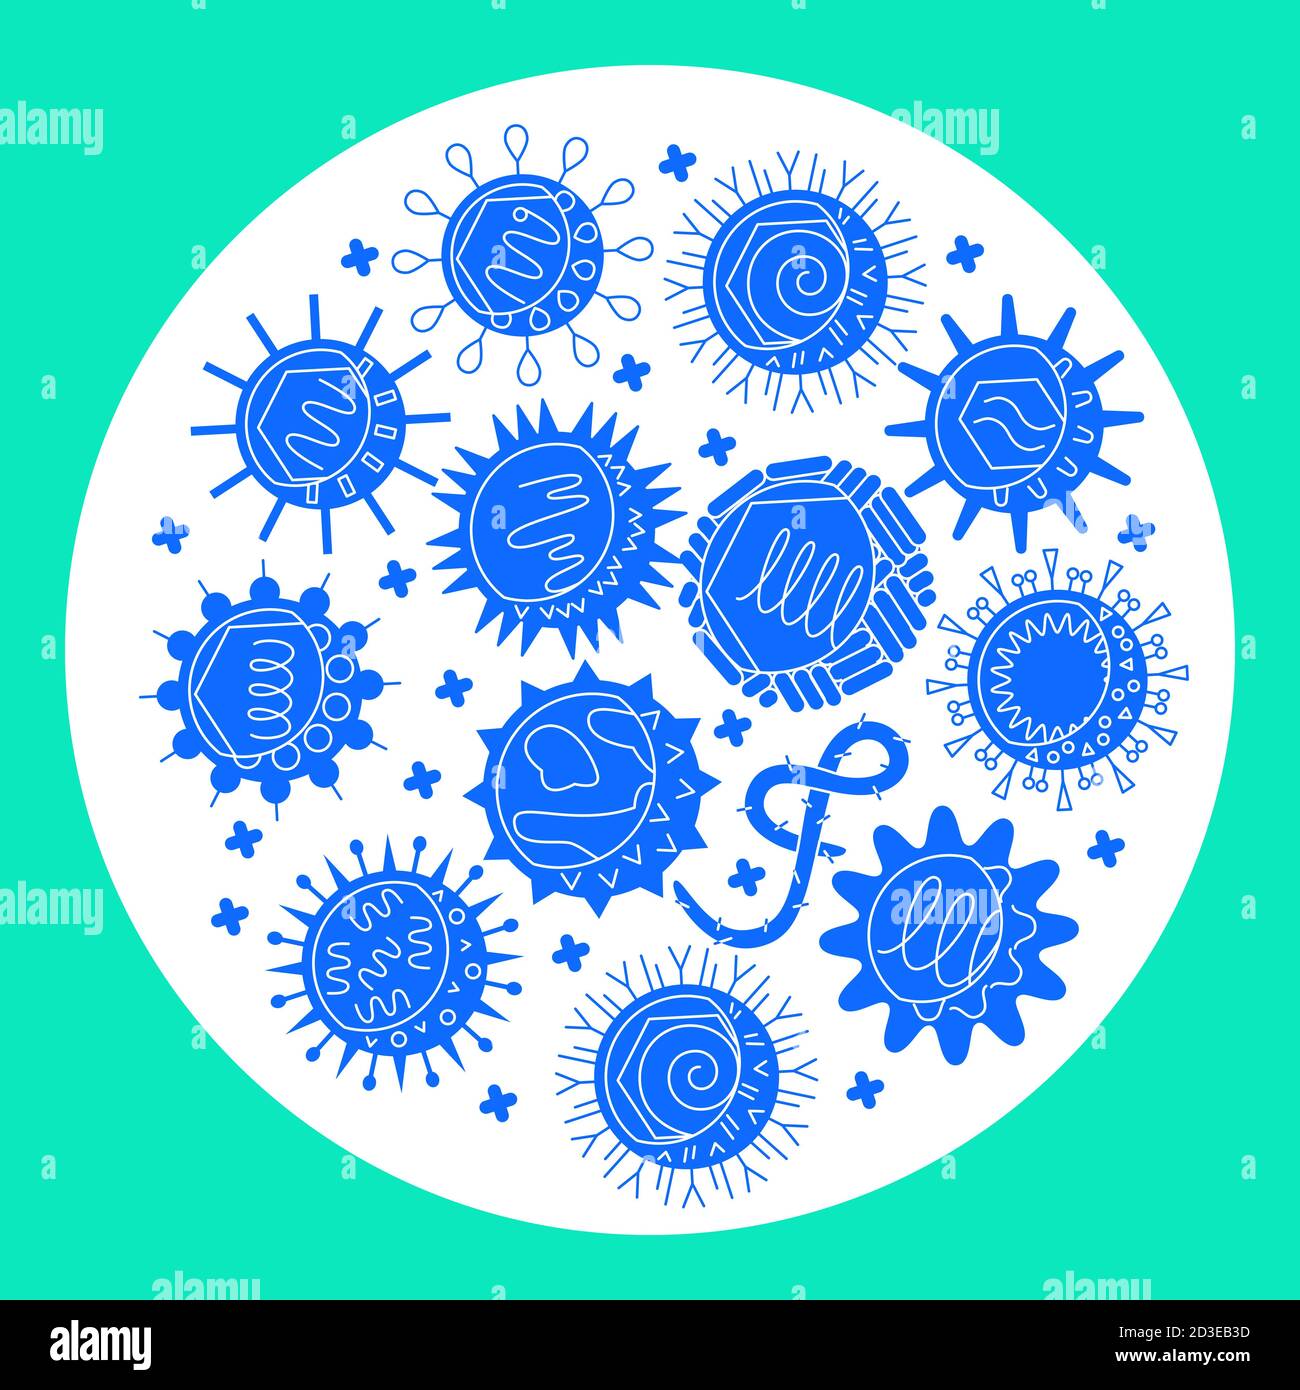 Human virus types concept banner in flat style Stock Vector